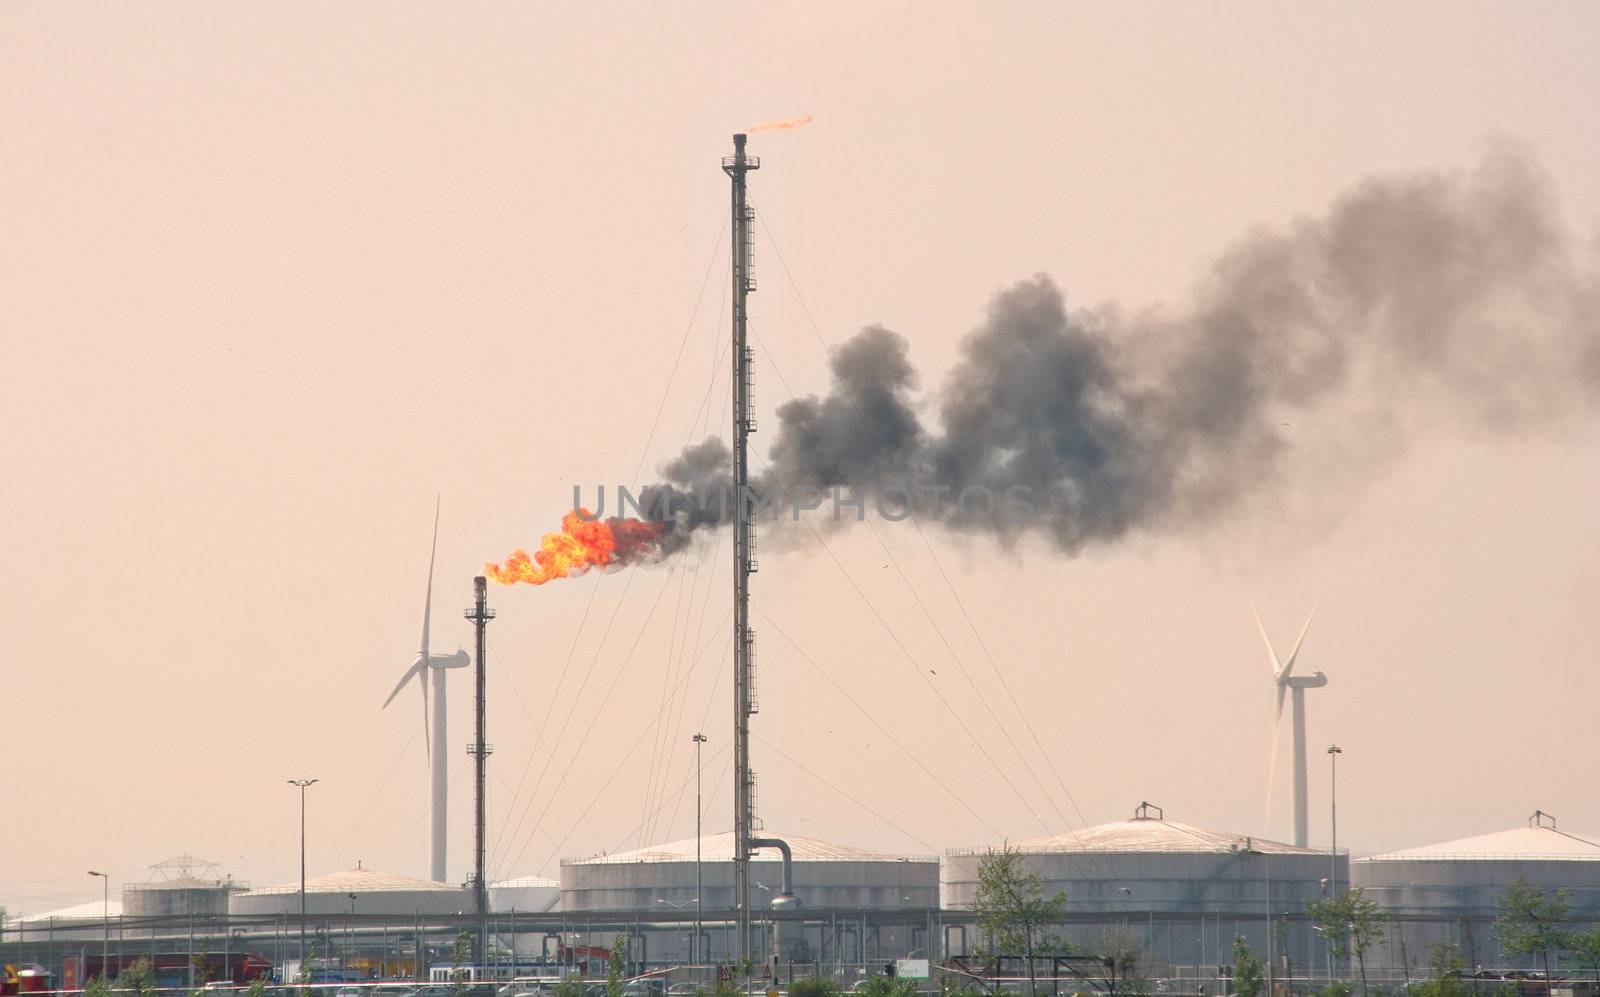 Flare from an oil refinery stack and silo's in Rotterdam Europoort